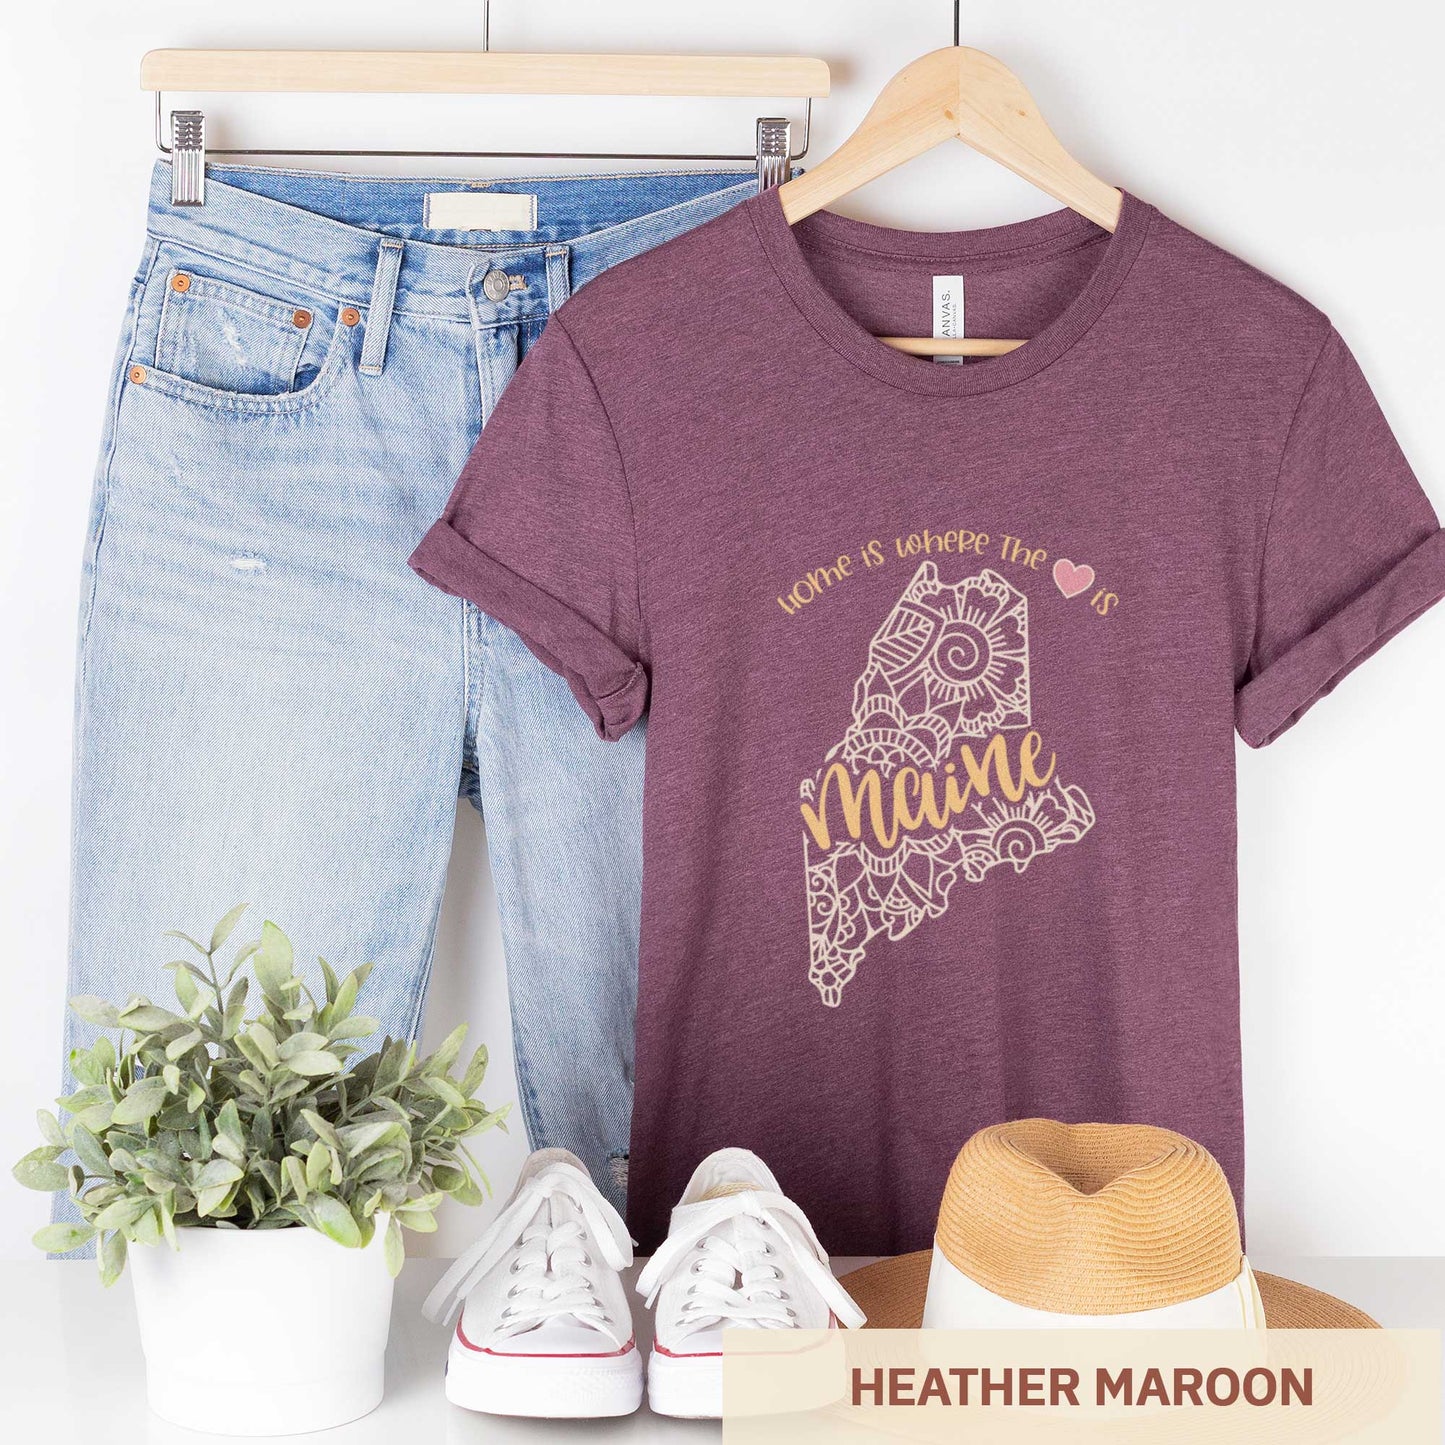 A hanging heather maroon Bella Canvas t-shirt featuring a mandala in the shape of Maine with the words home is where the heart is.